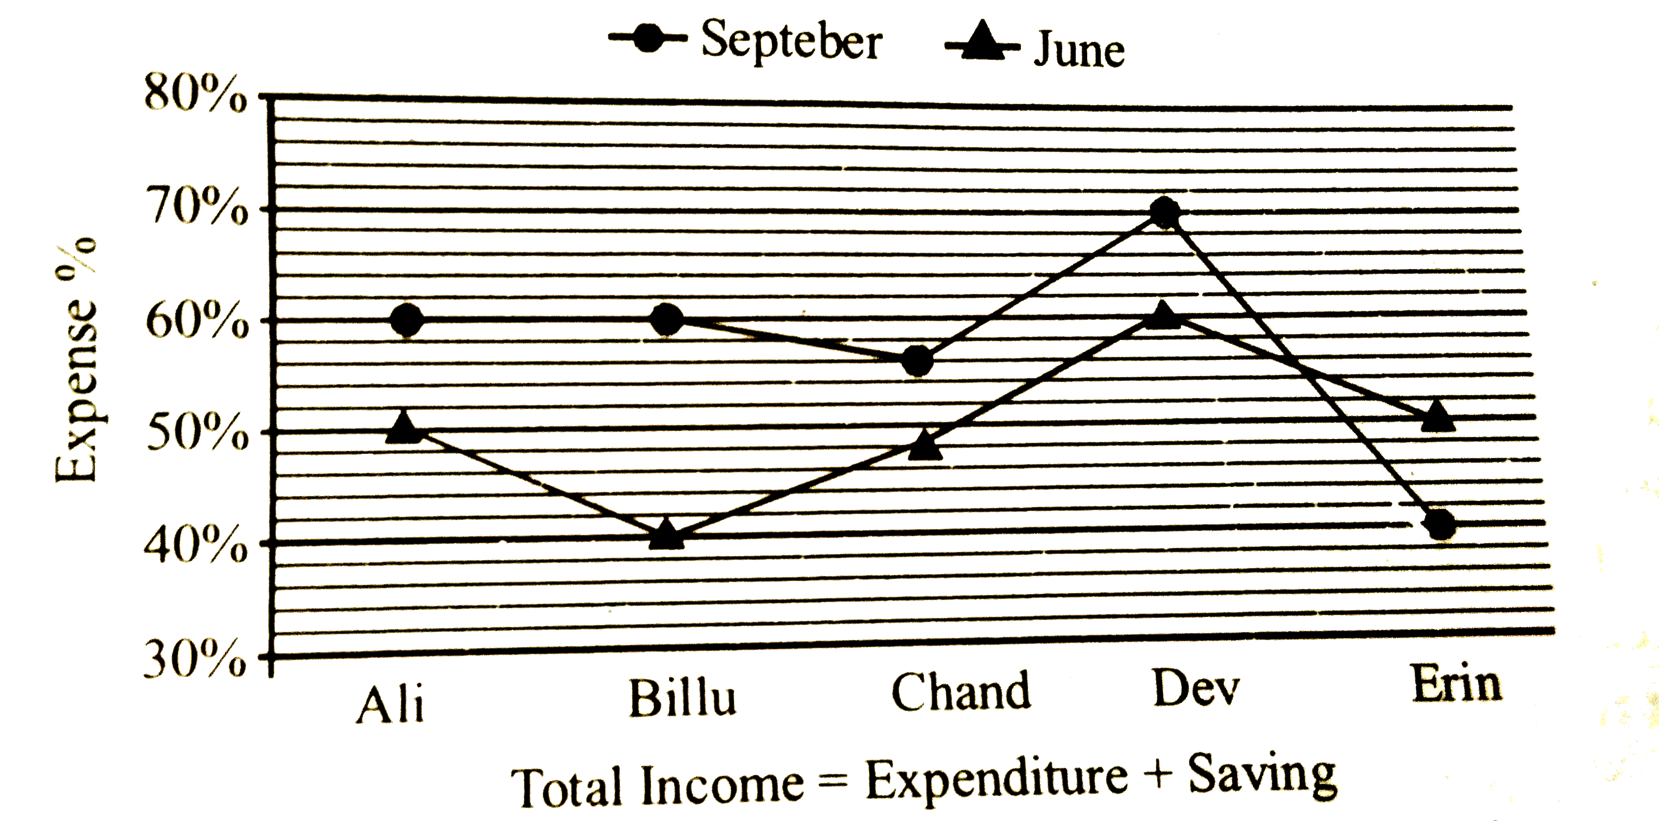 Average saving of Chand in both months is Rs.  19,200 while Ali's incopme is 20% more than Chand's income. Find expense of Ali in the month of September